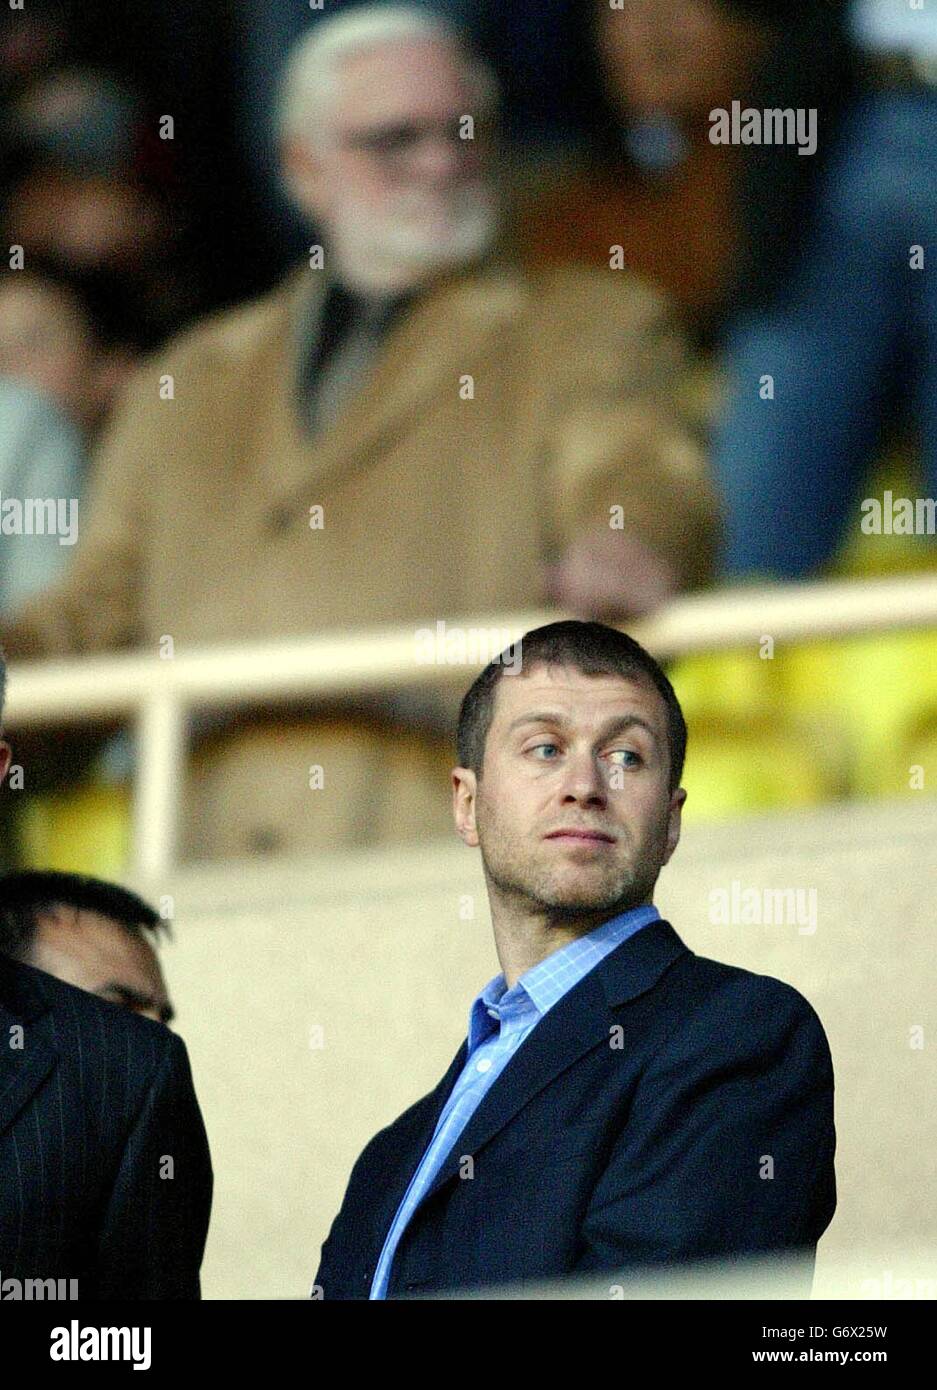 Chelsea owner Roman Abramovich and former Chairman Ken Bates (behind left) wait for the start of the UEFA Champions League semi final 1st leg match at the Stade Louis II in Monaco Stock Photo